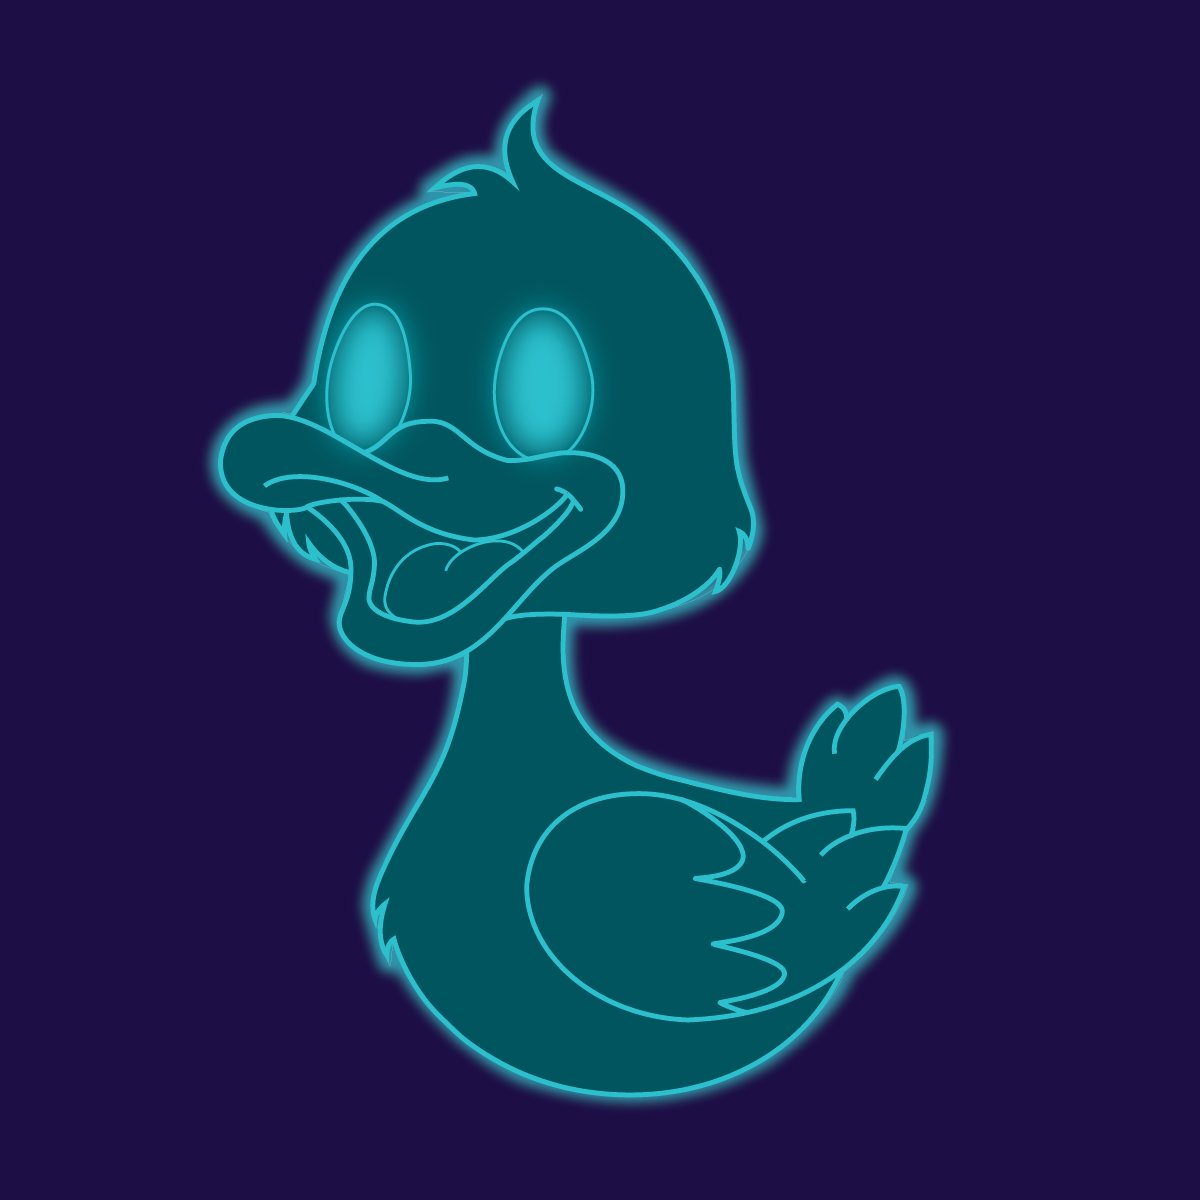 PUBLIC Sale begins NOW! Mint 1 Duck for .009E (~$15). If we mint out in the next 24 hours, we will give 5 random minters $500. If we mint out in the next 72 hours, we will give 3 minters $500 & 1 person $500 who tags three friends in the comments below! #LFQuack #DDD #PublicMint